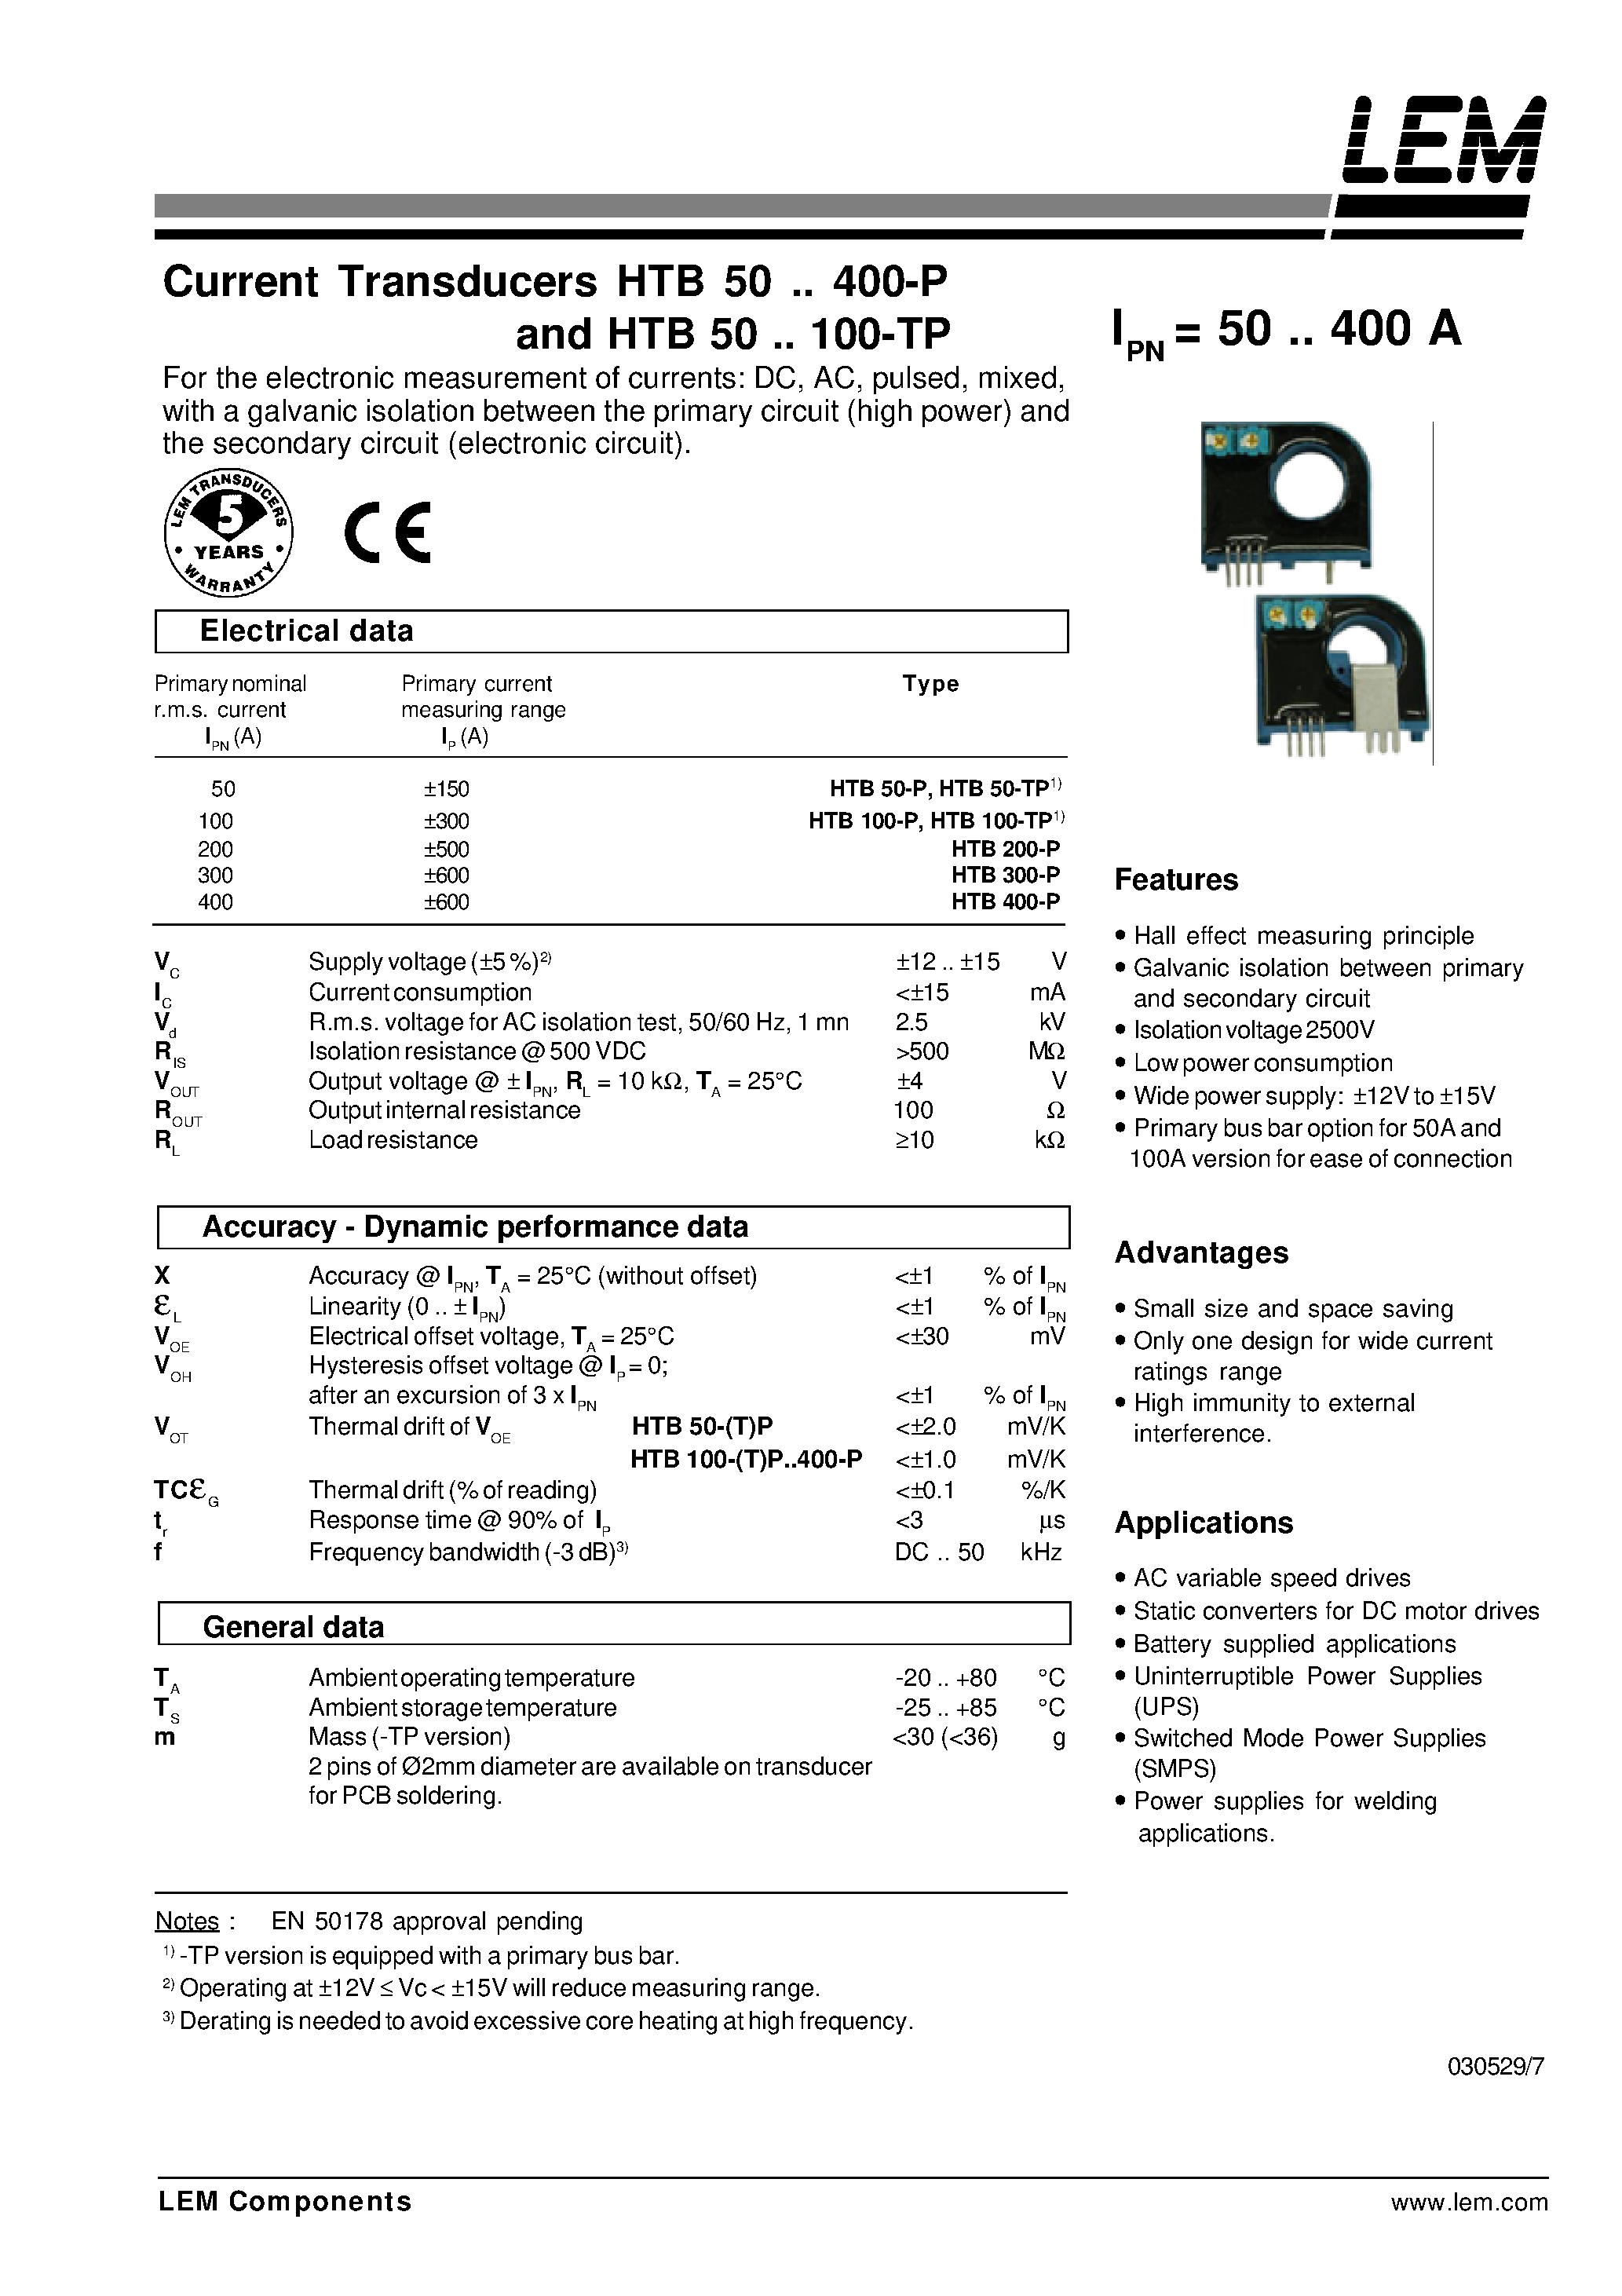 Datasheet HTB300-P - Current Transducers HTB 50~400-P and HTB 50~100-TP page 1